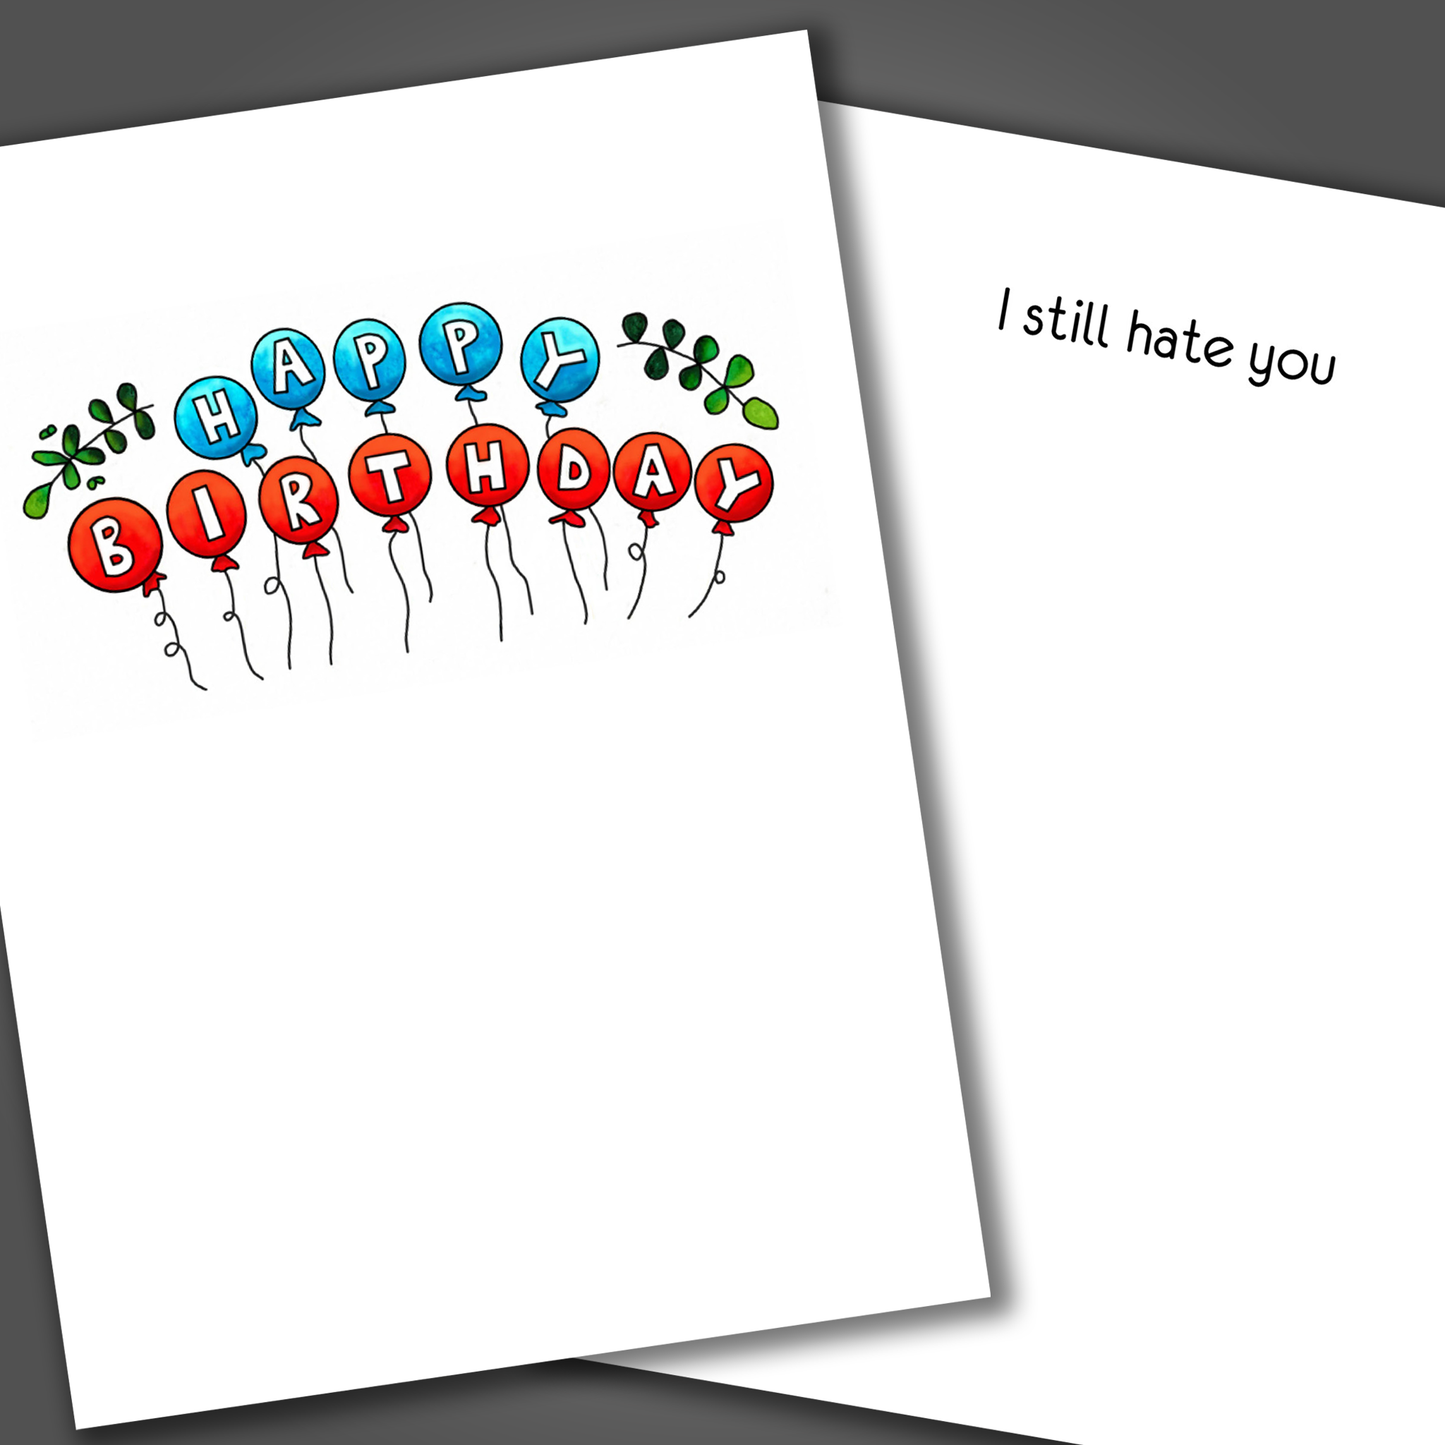 Funny happy birthday card with red and blue balloons drawn on the front of the card. Inside the card is a funny joke inside card that says I still hate you.